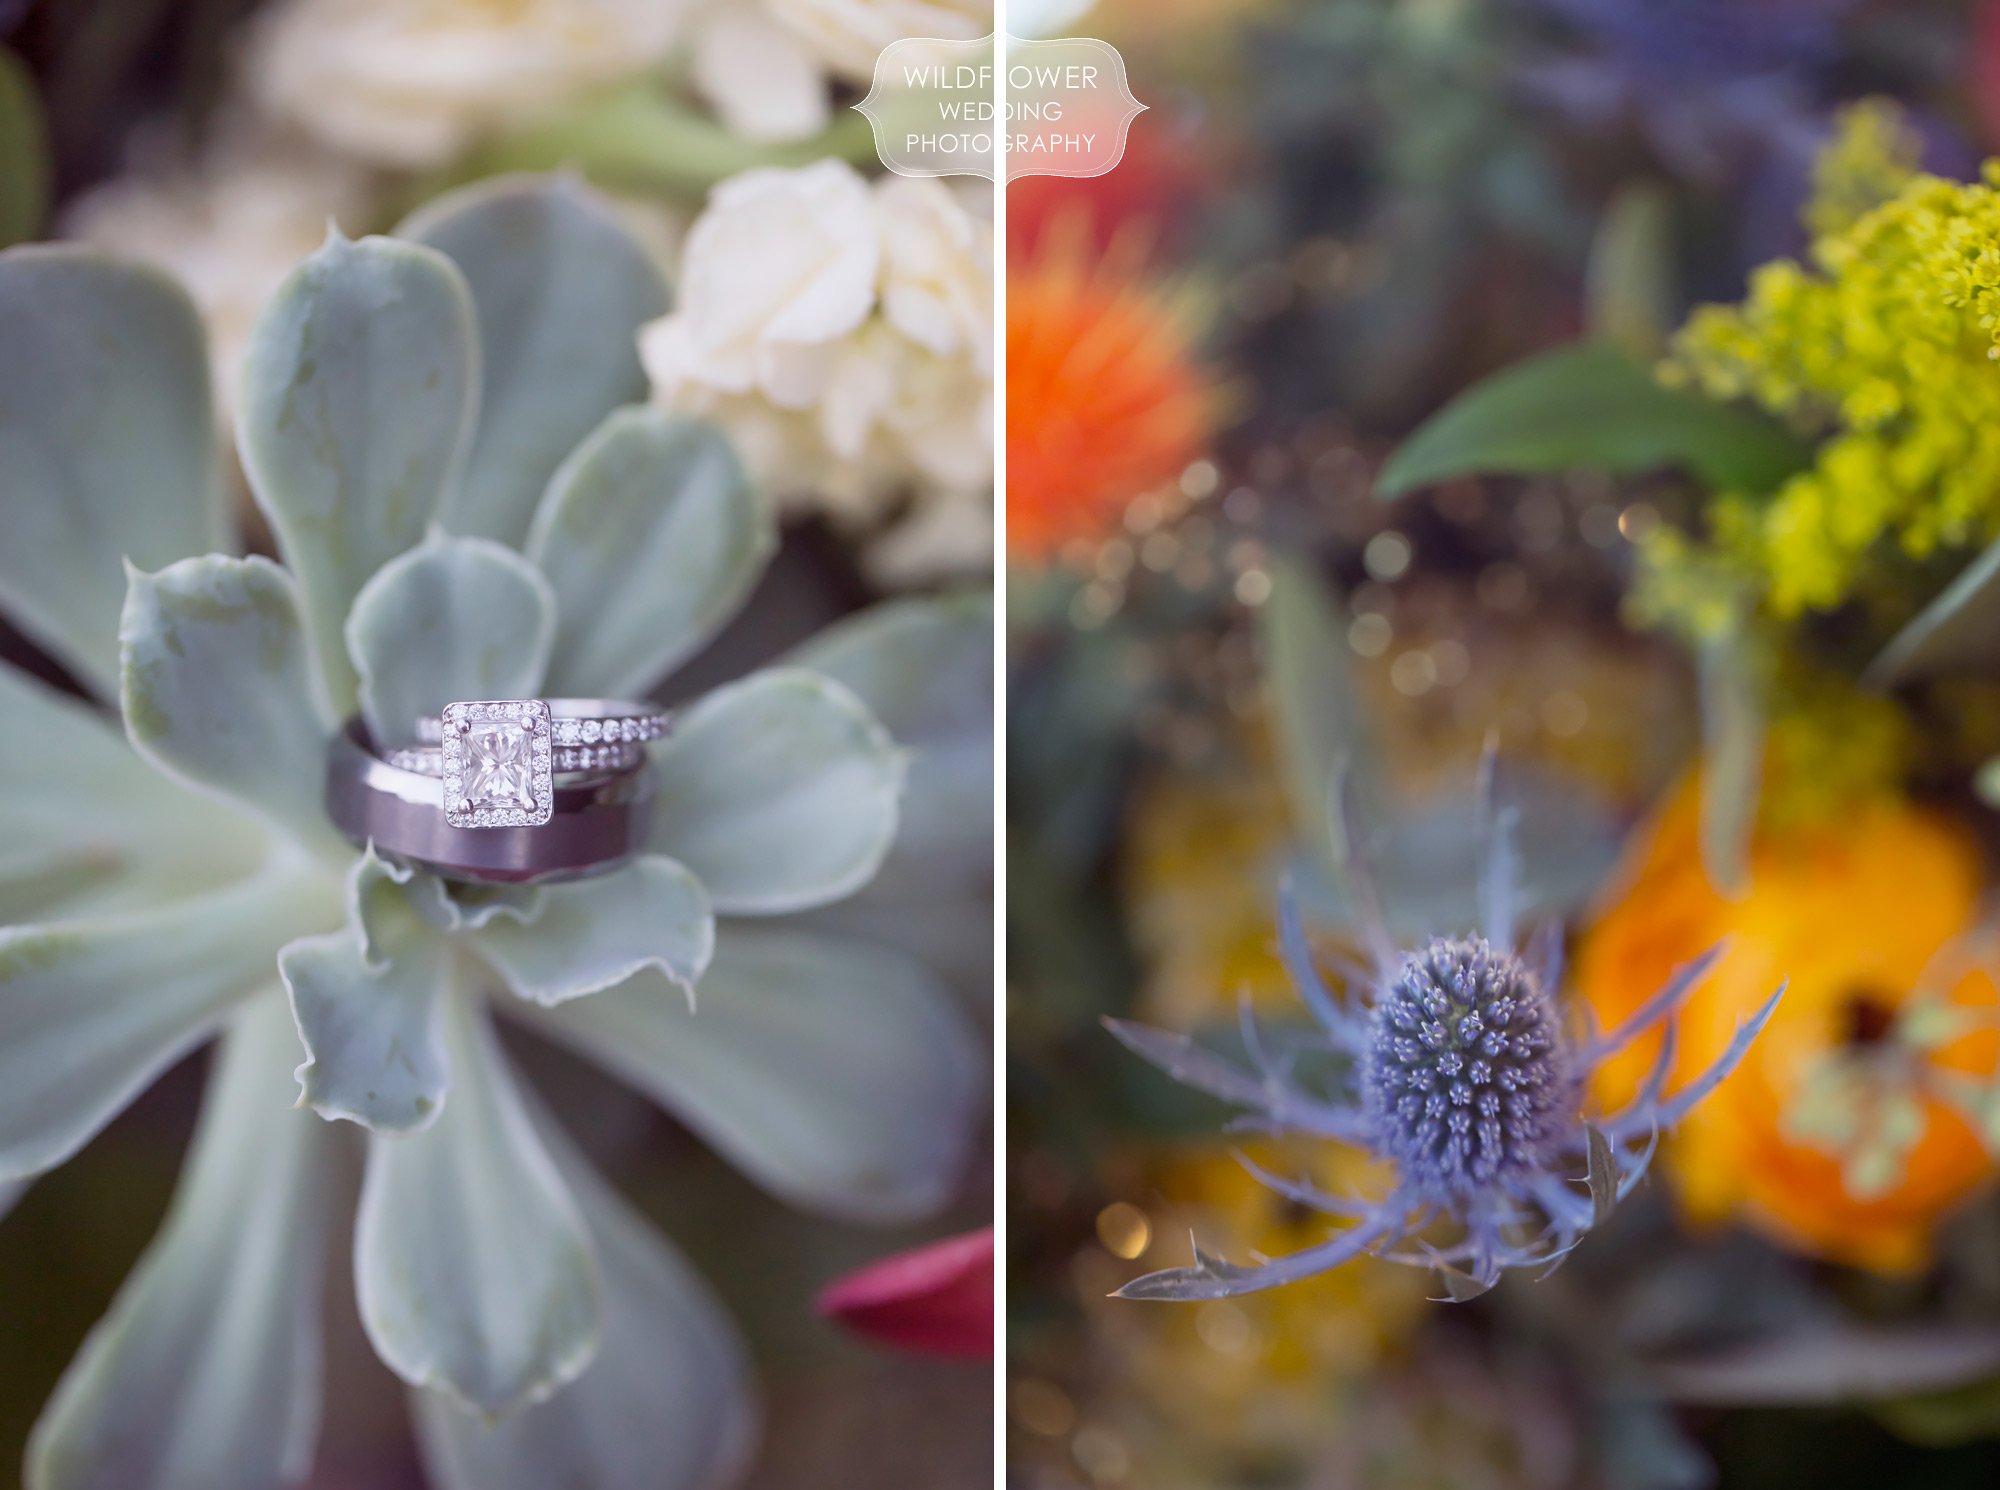 Nature inspired wedding photography with succulents and an engagement ring at the Schwinn Produce Farm.